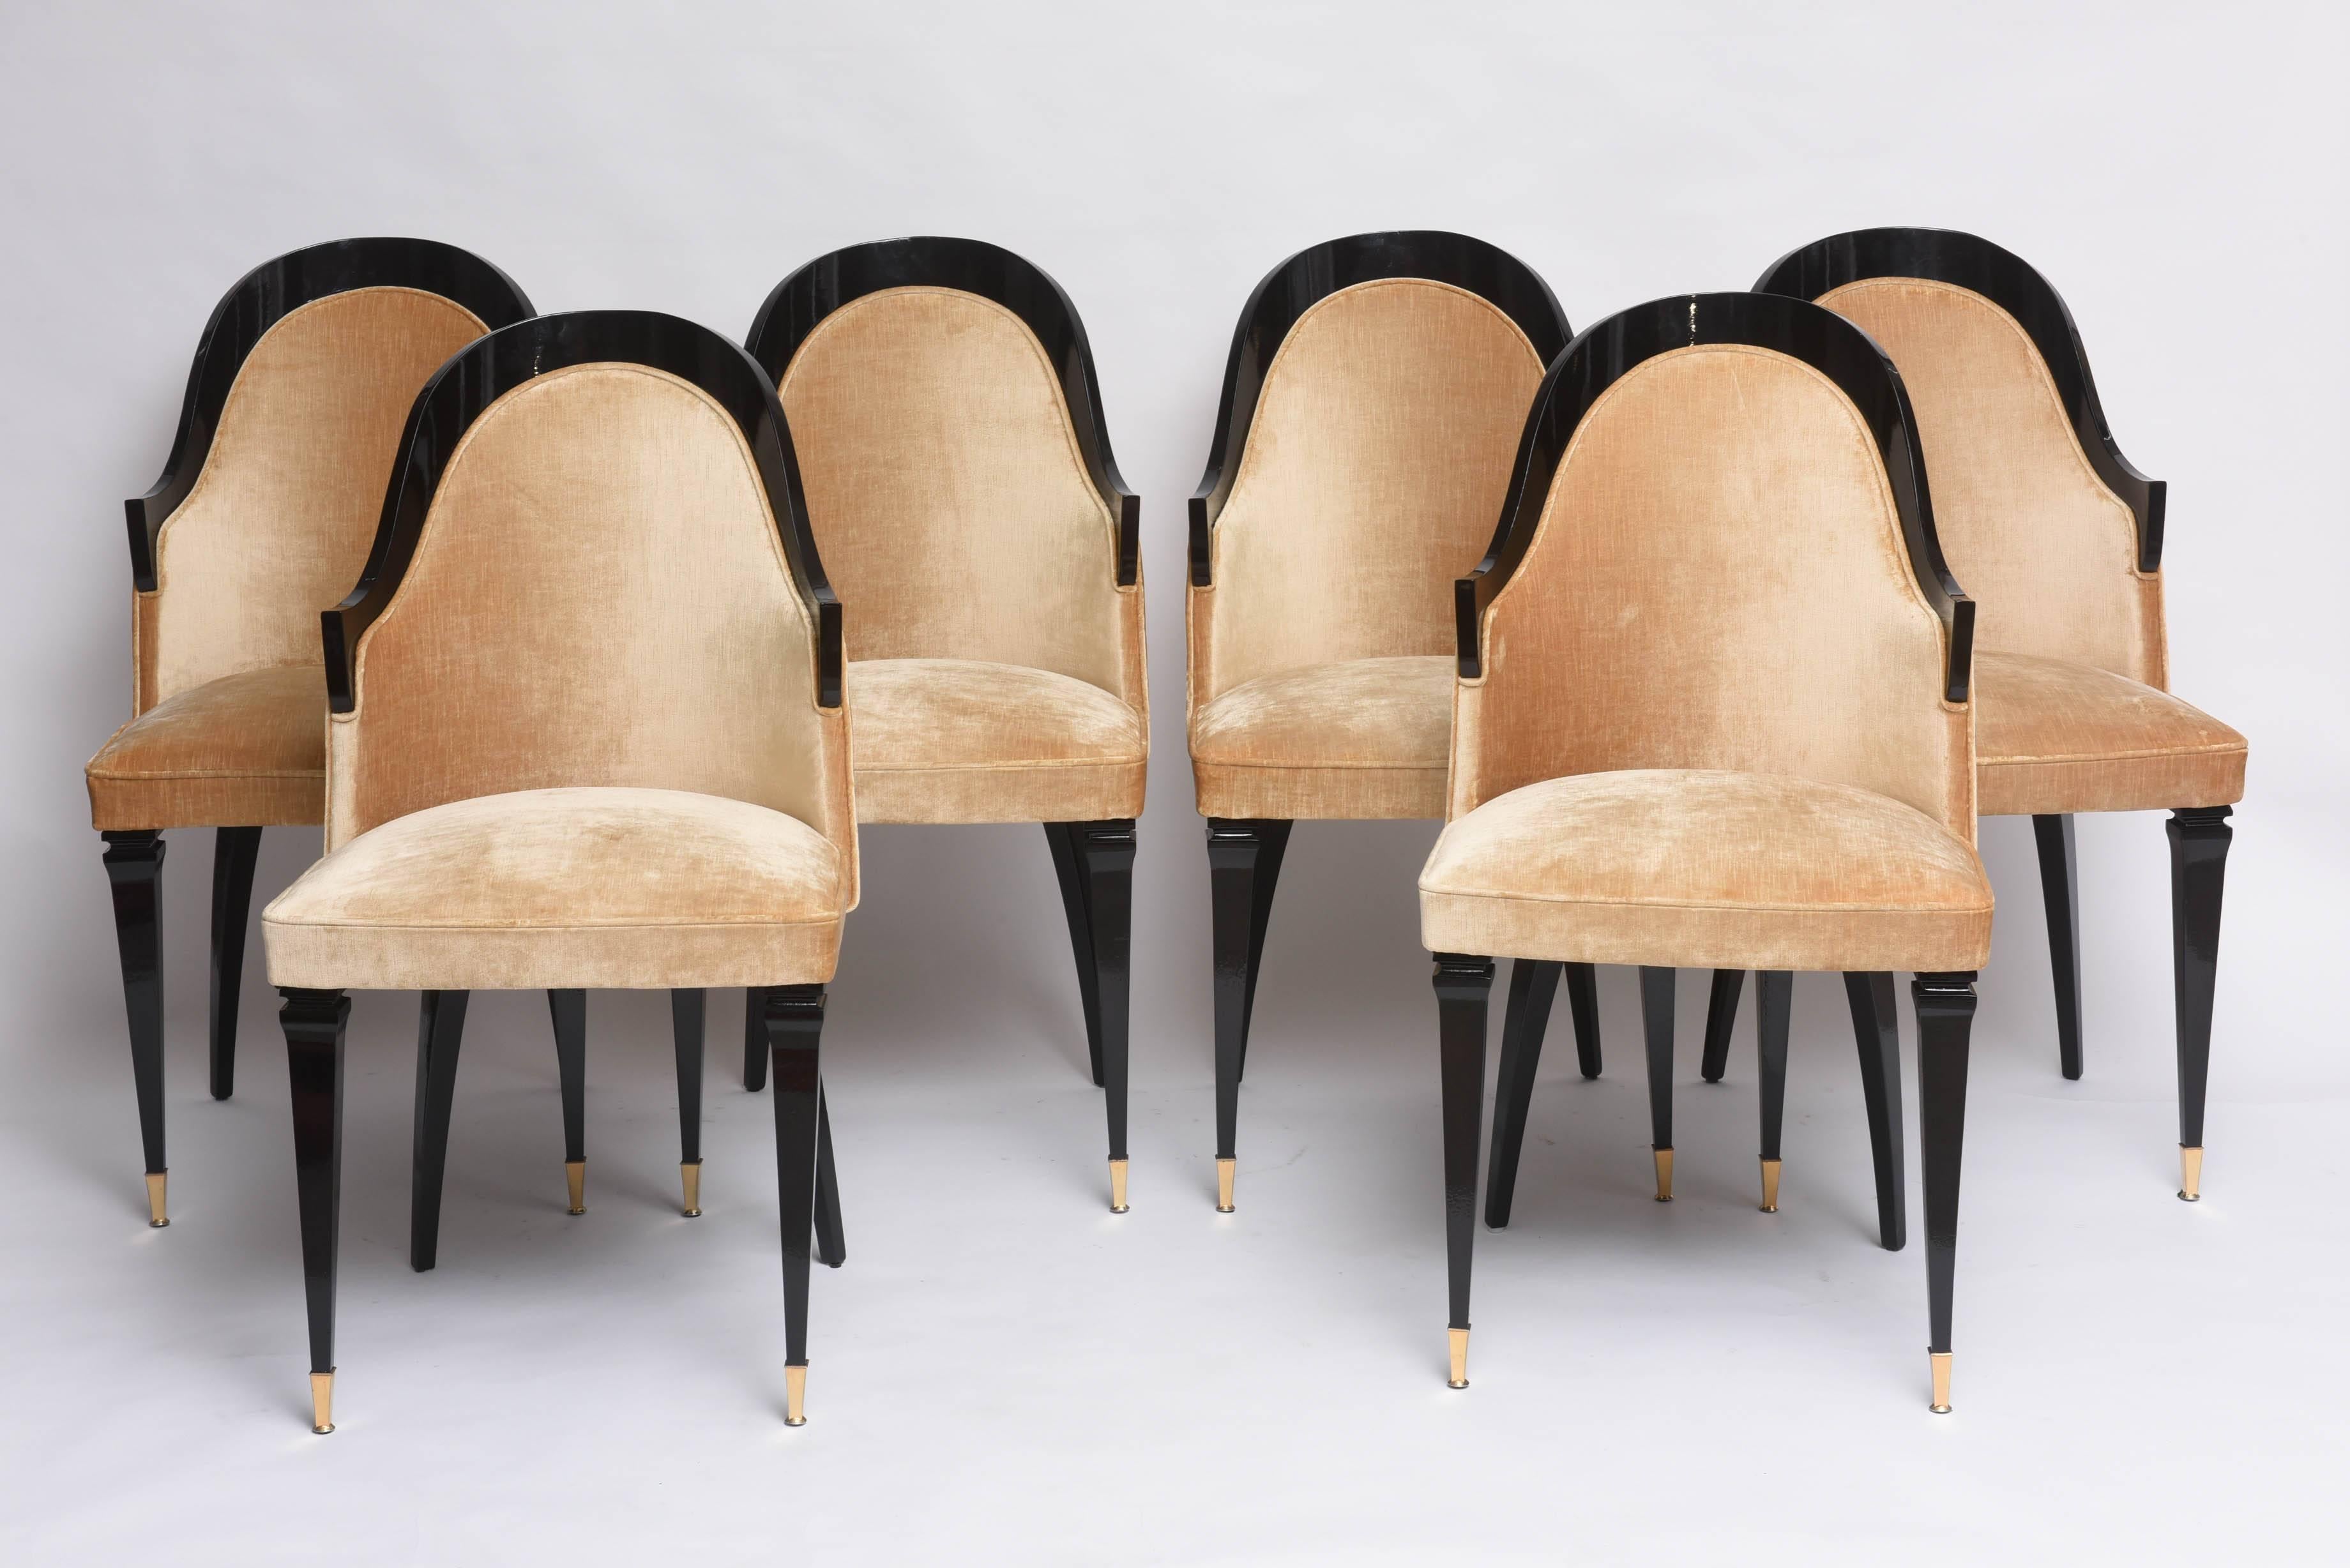 This set of Art Deco style dining chairs were purchased in France and are in the style of the 